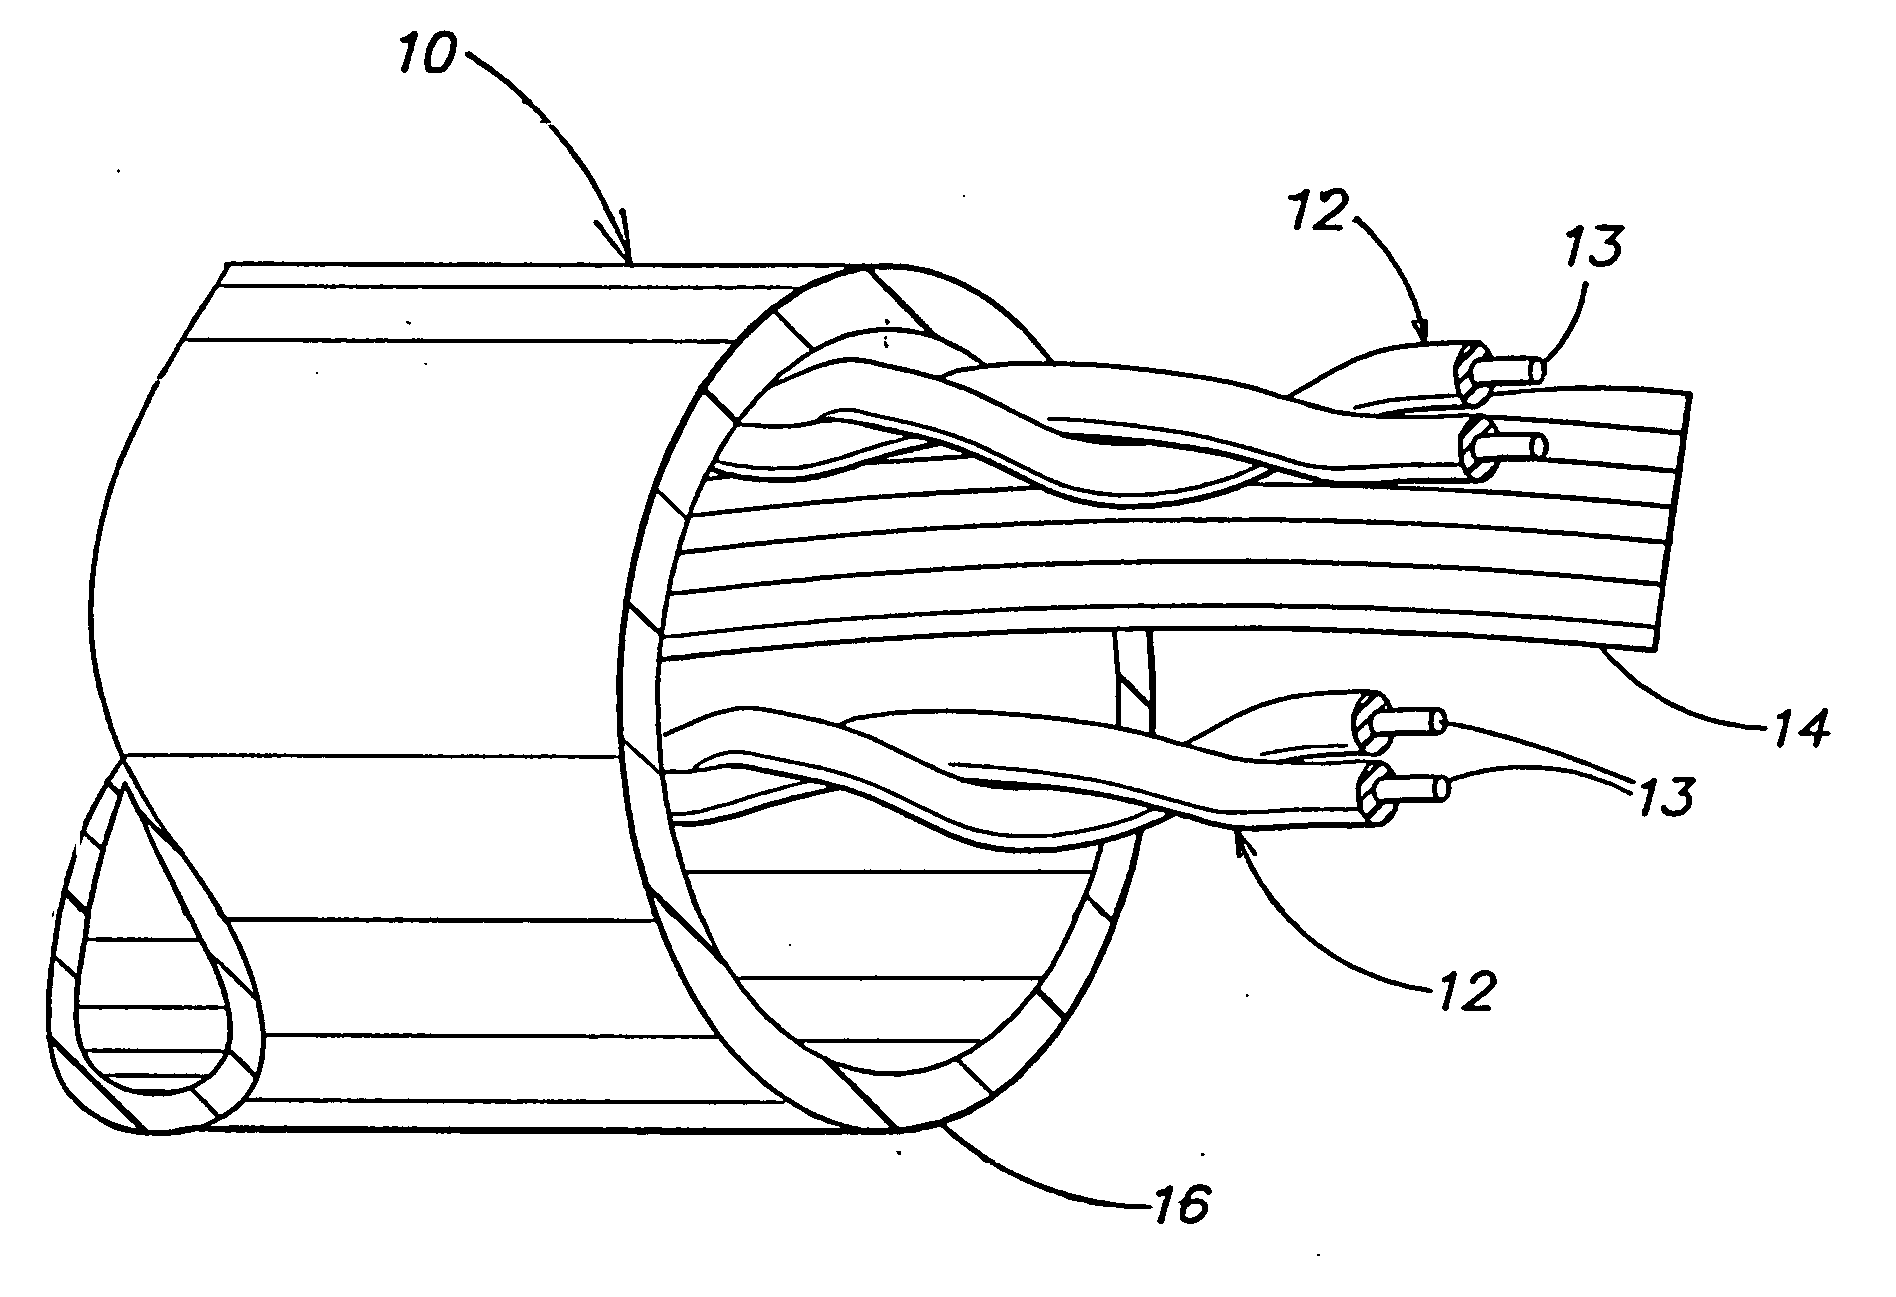 Multi-pair data cable with configurable core filling and pair separation